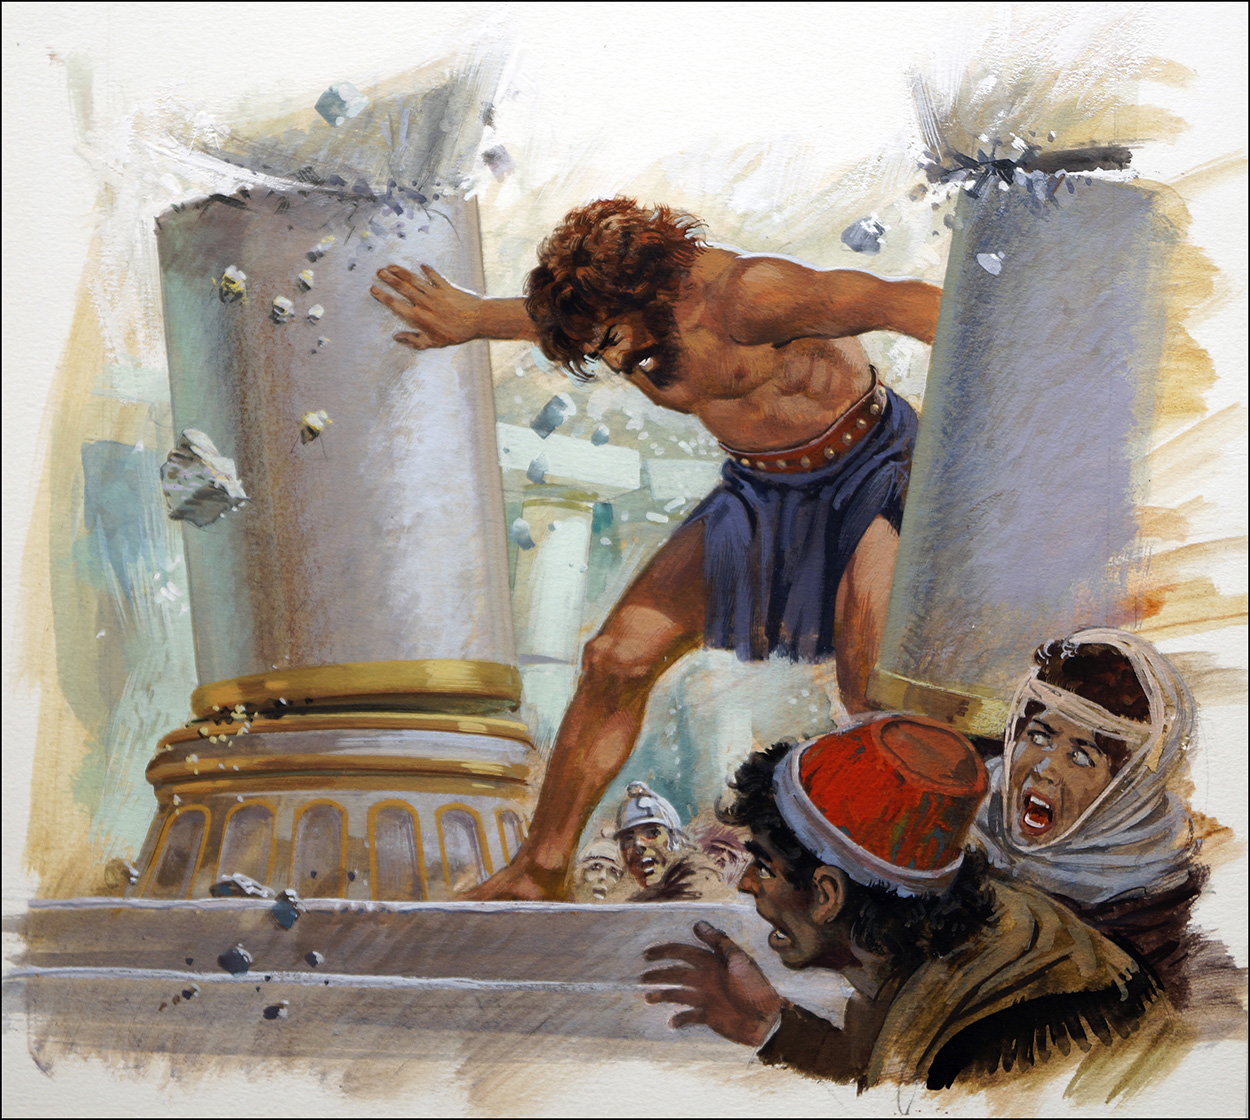 Samson Destroys the Philistines (Original) art by Andrew Howat at The Illustration Art Gallery